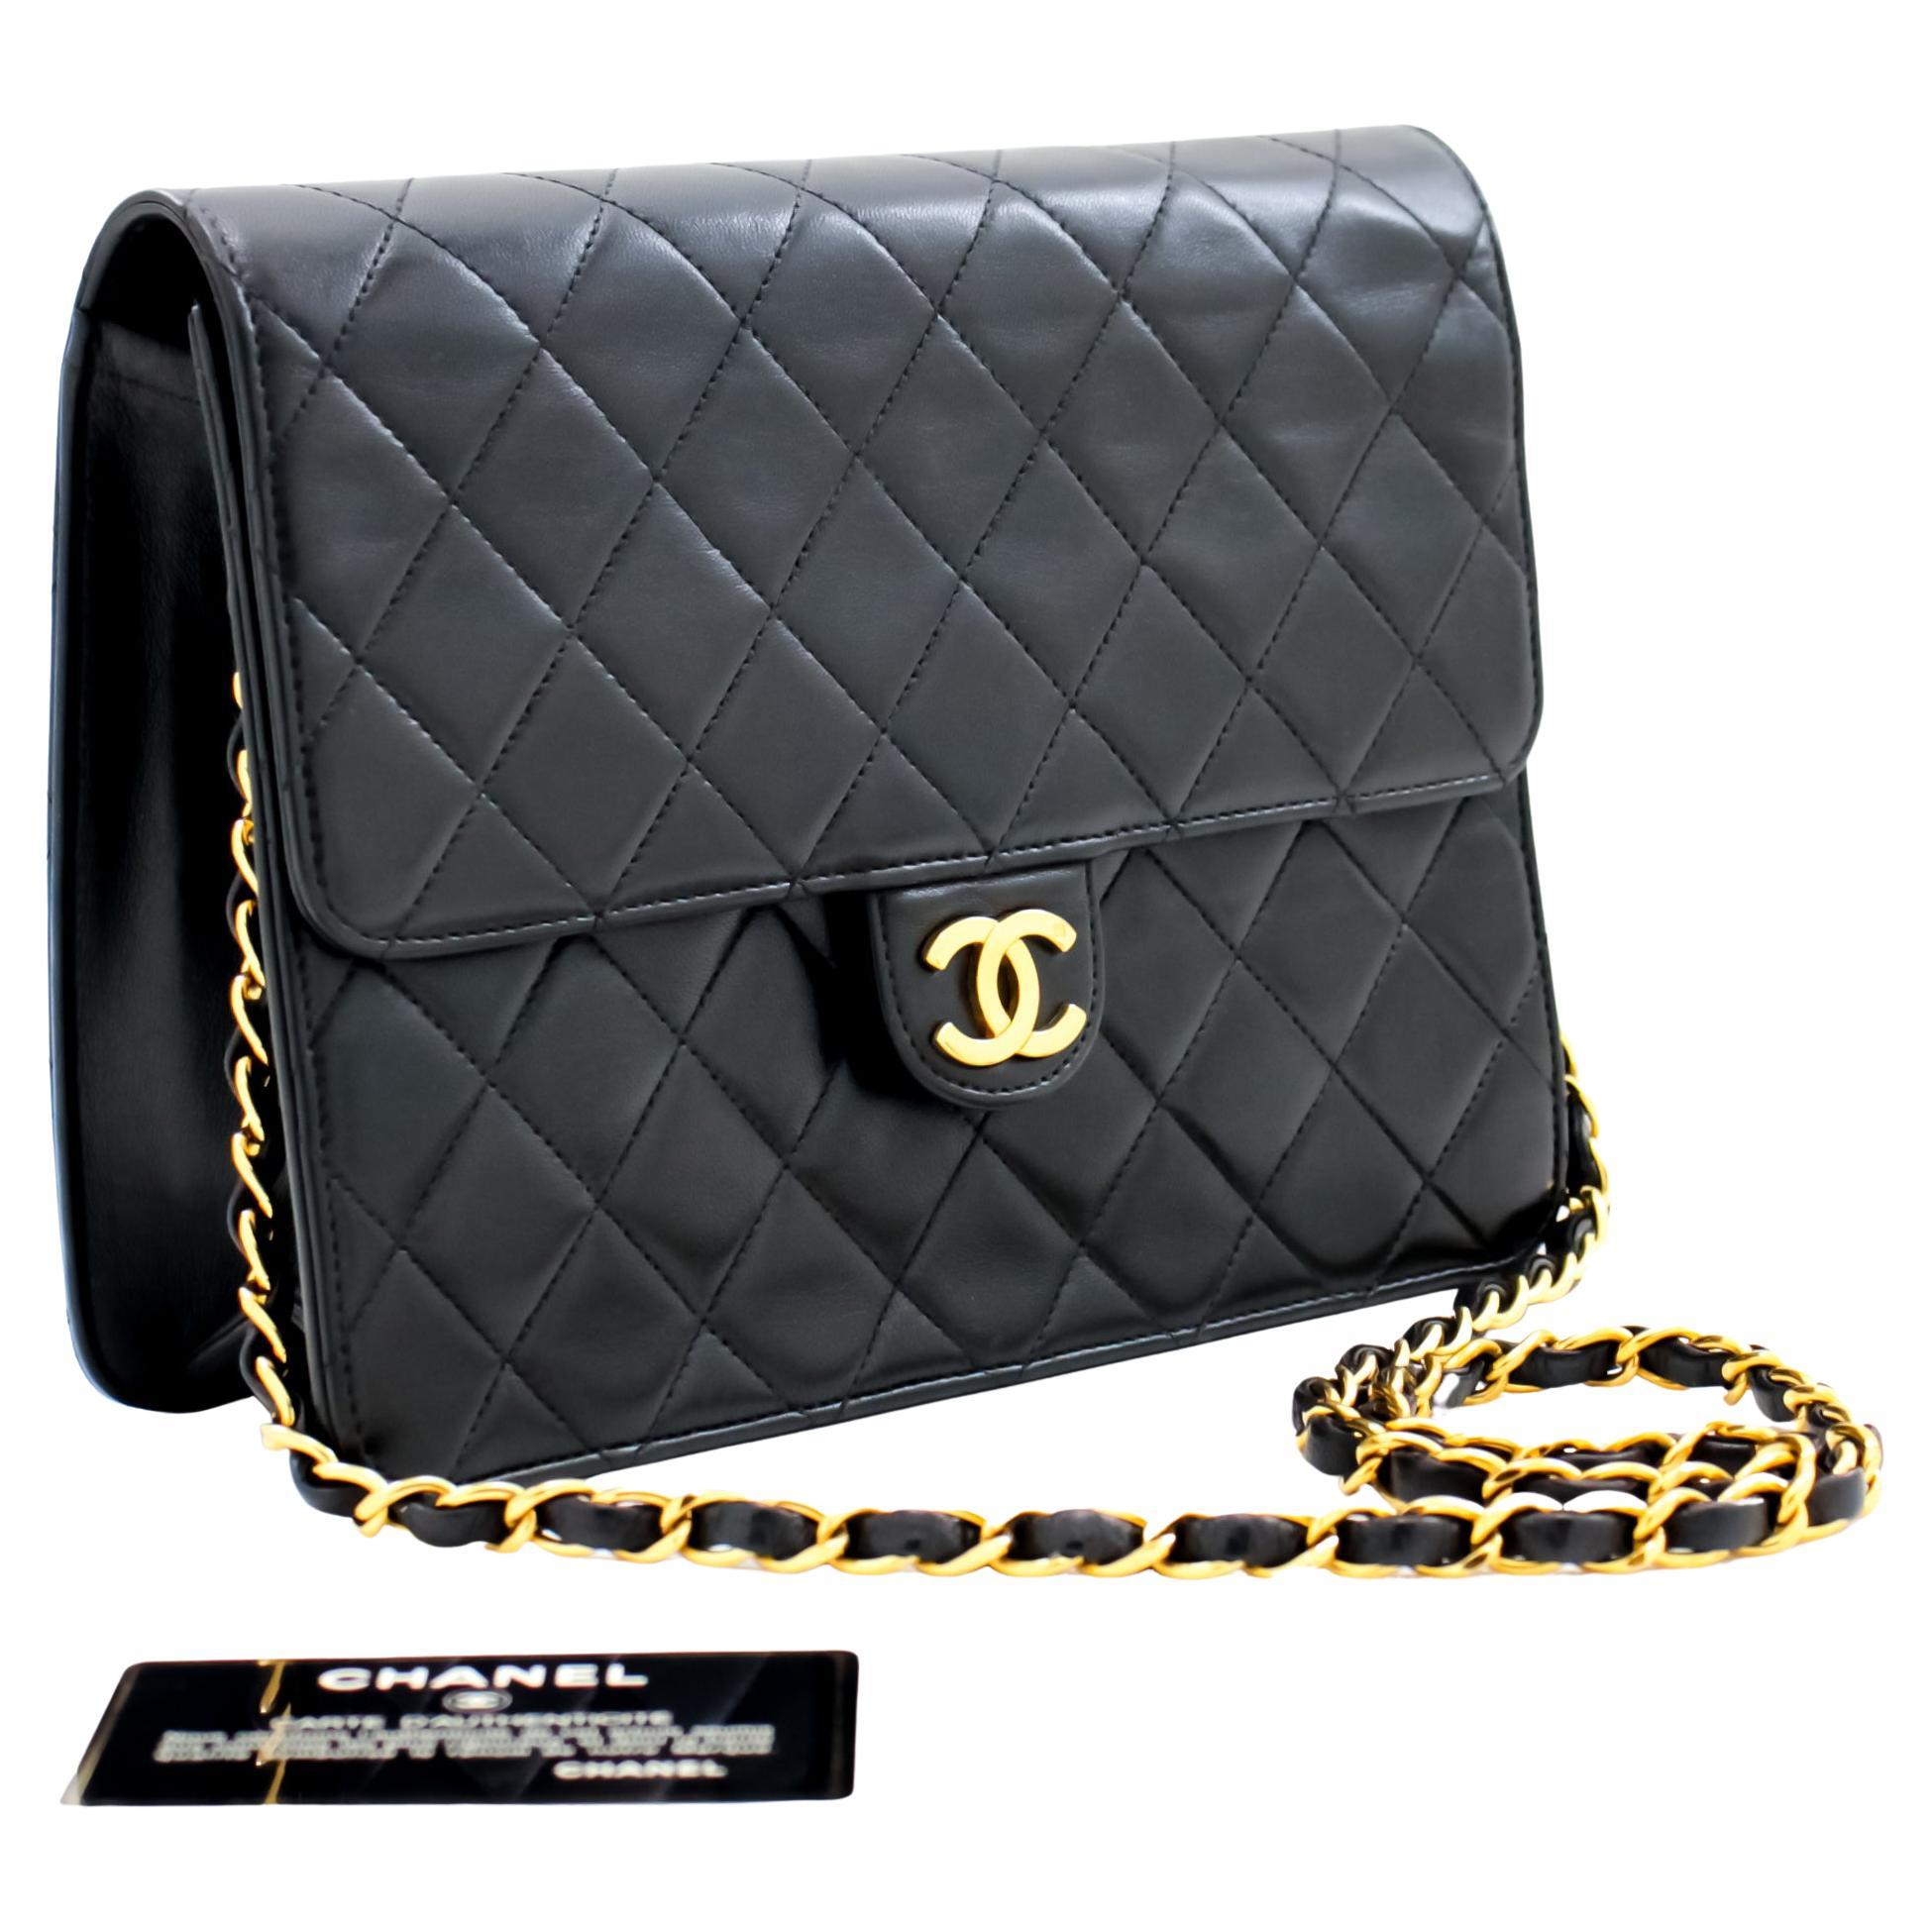 CHANEL Small Chain Shoulder Bag Black Clutch Flap Quilted